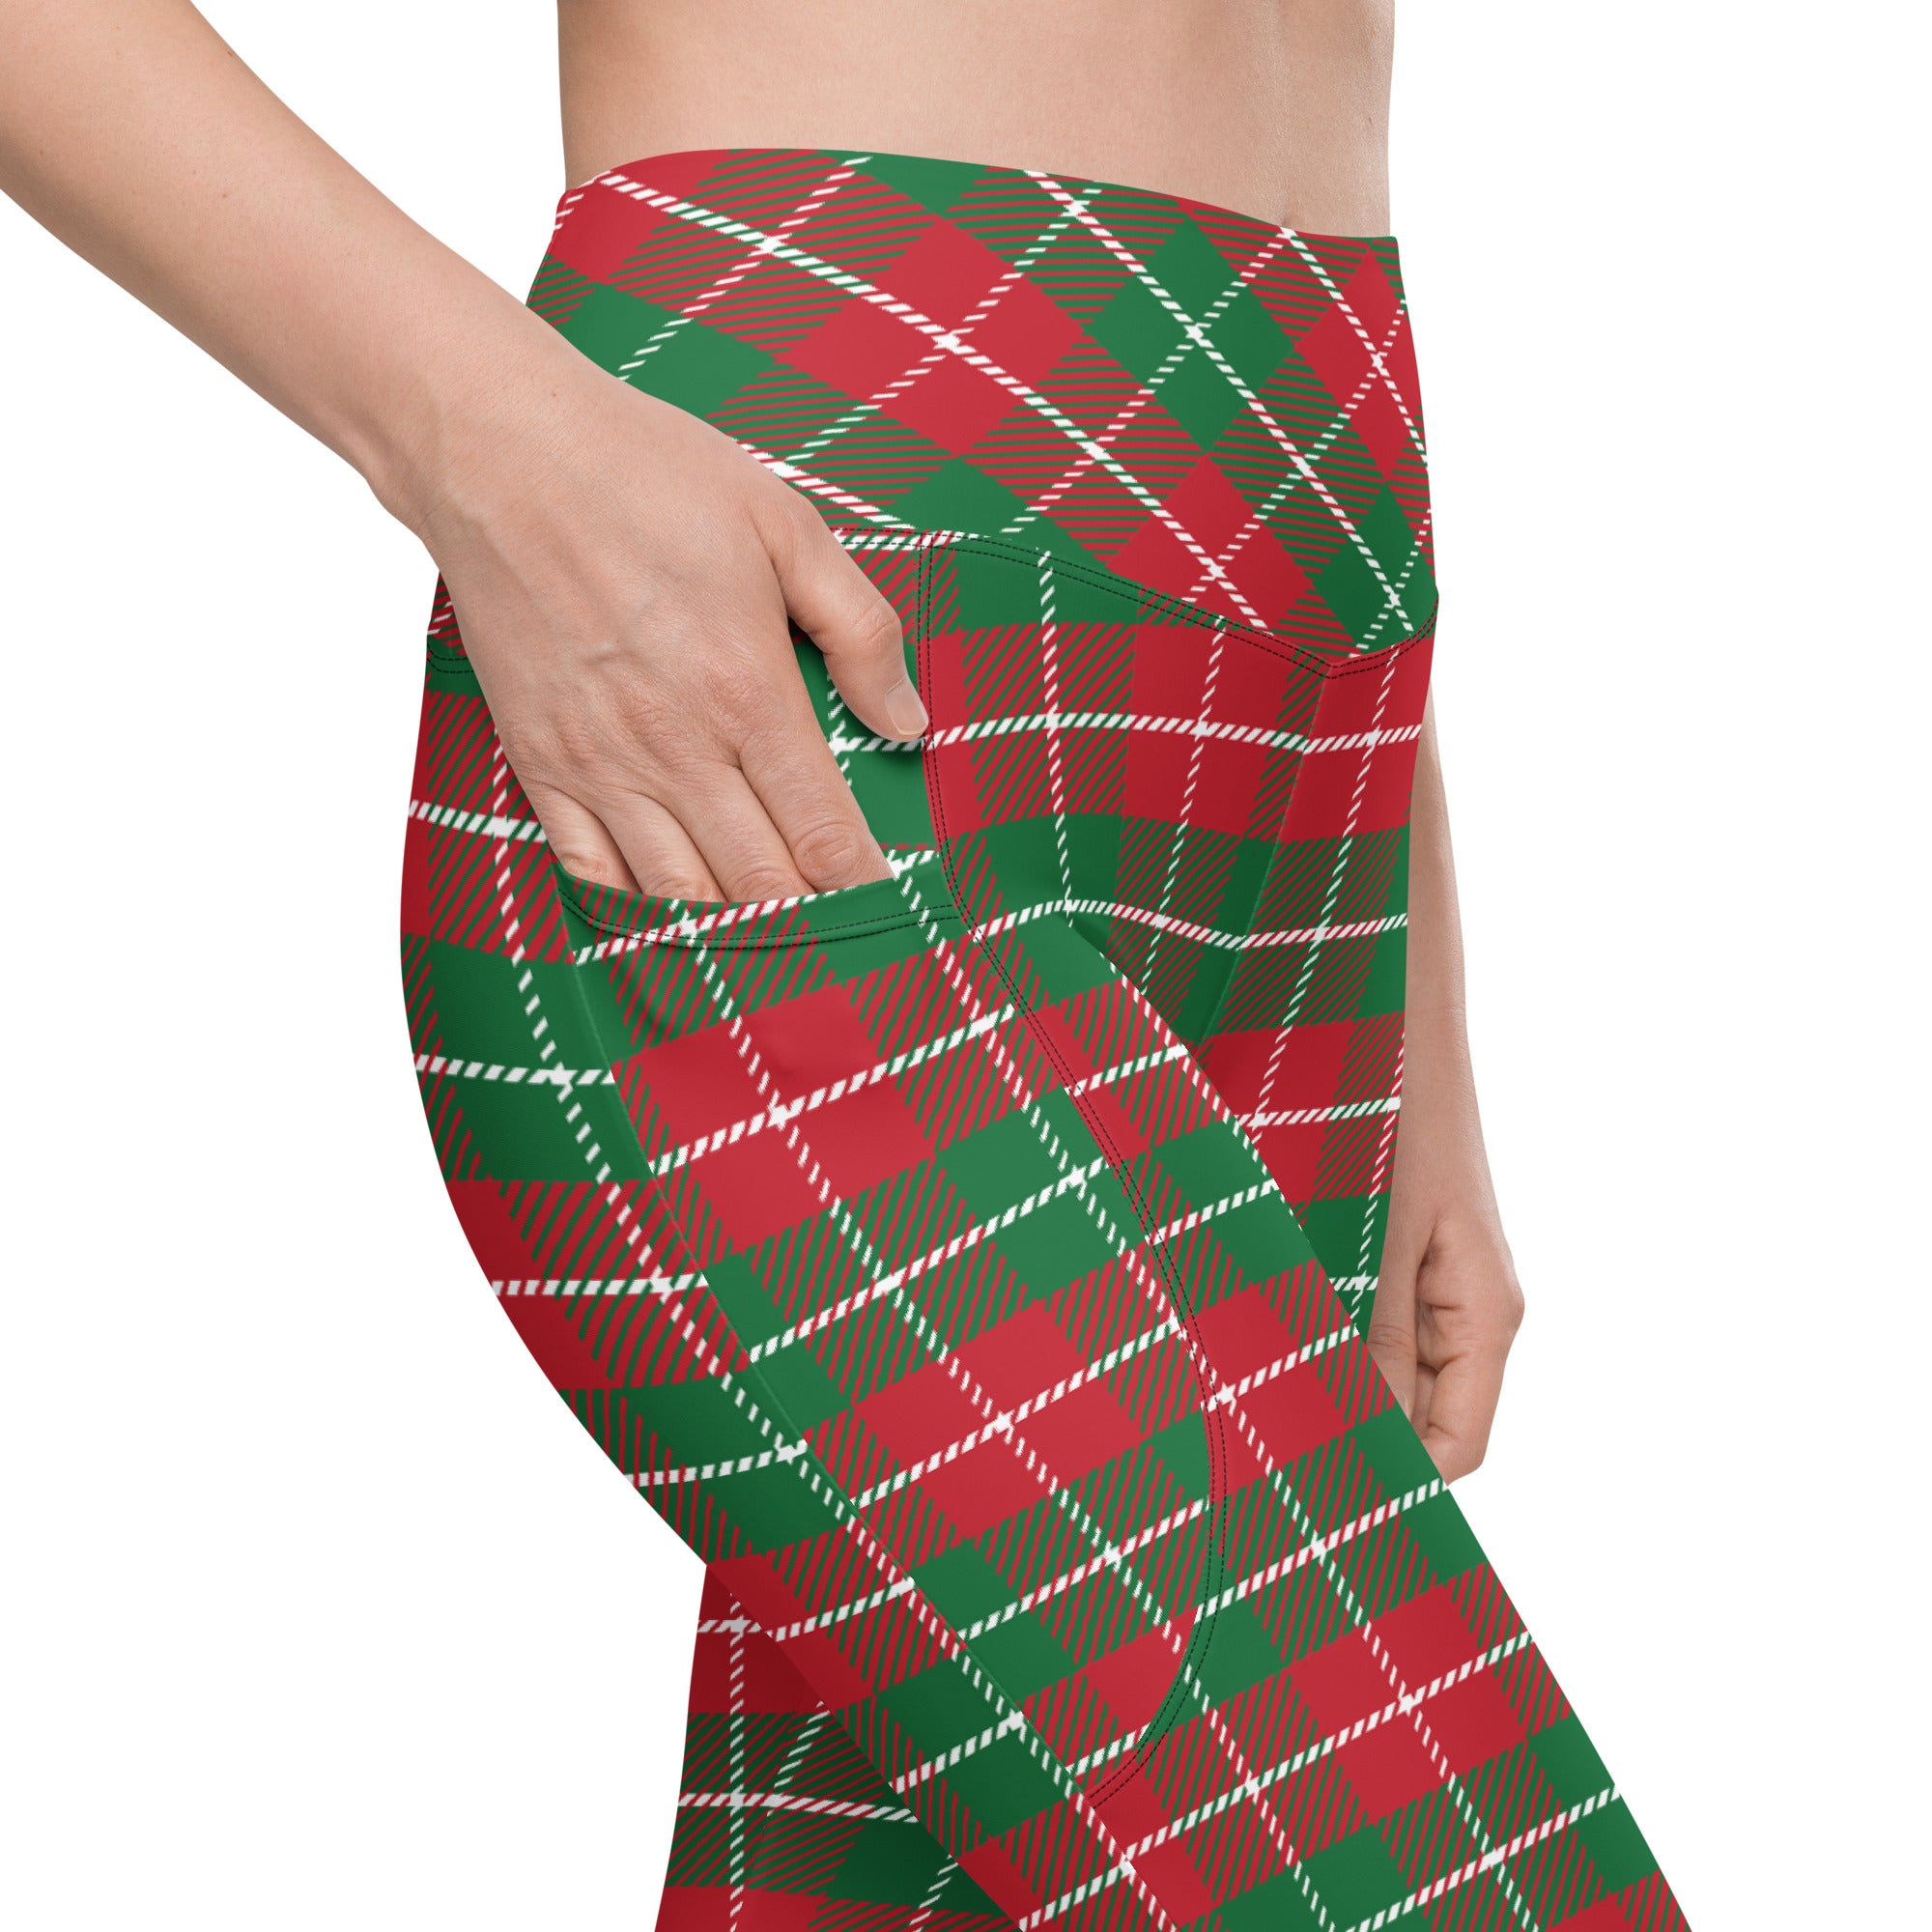 Green and Red Plaid Leggings with pockets